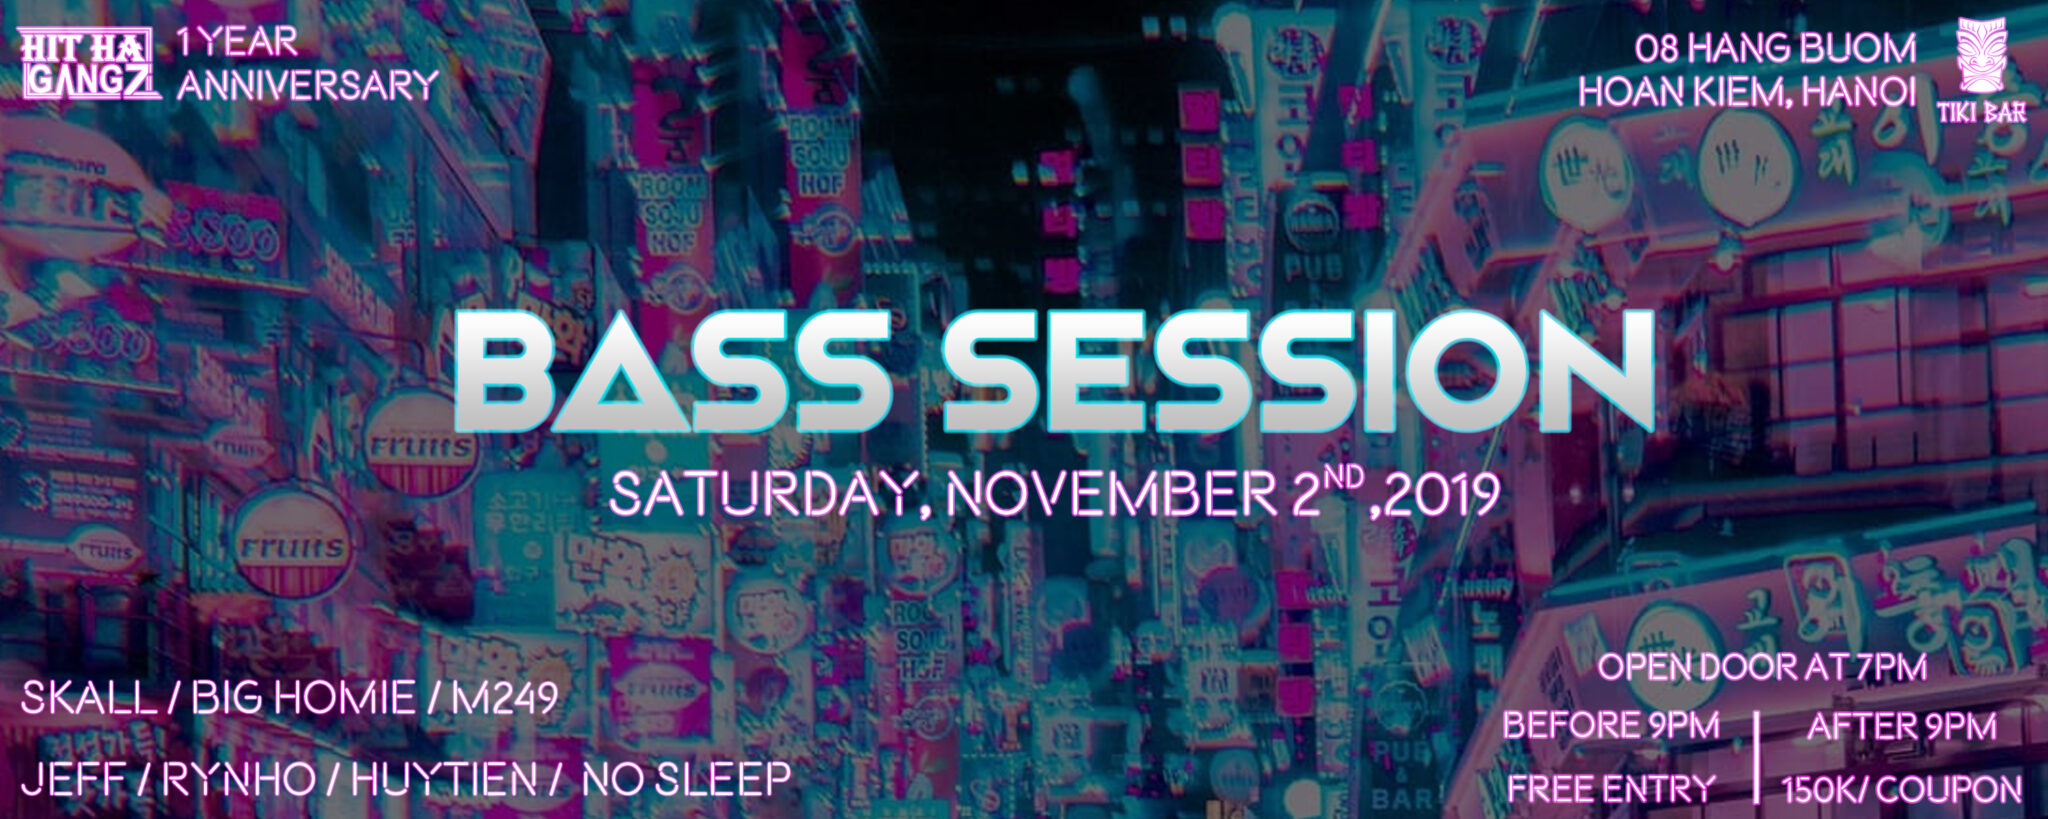 Hithagangz 1 Year Anniversary: Bass Session [Event Hanoi]